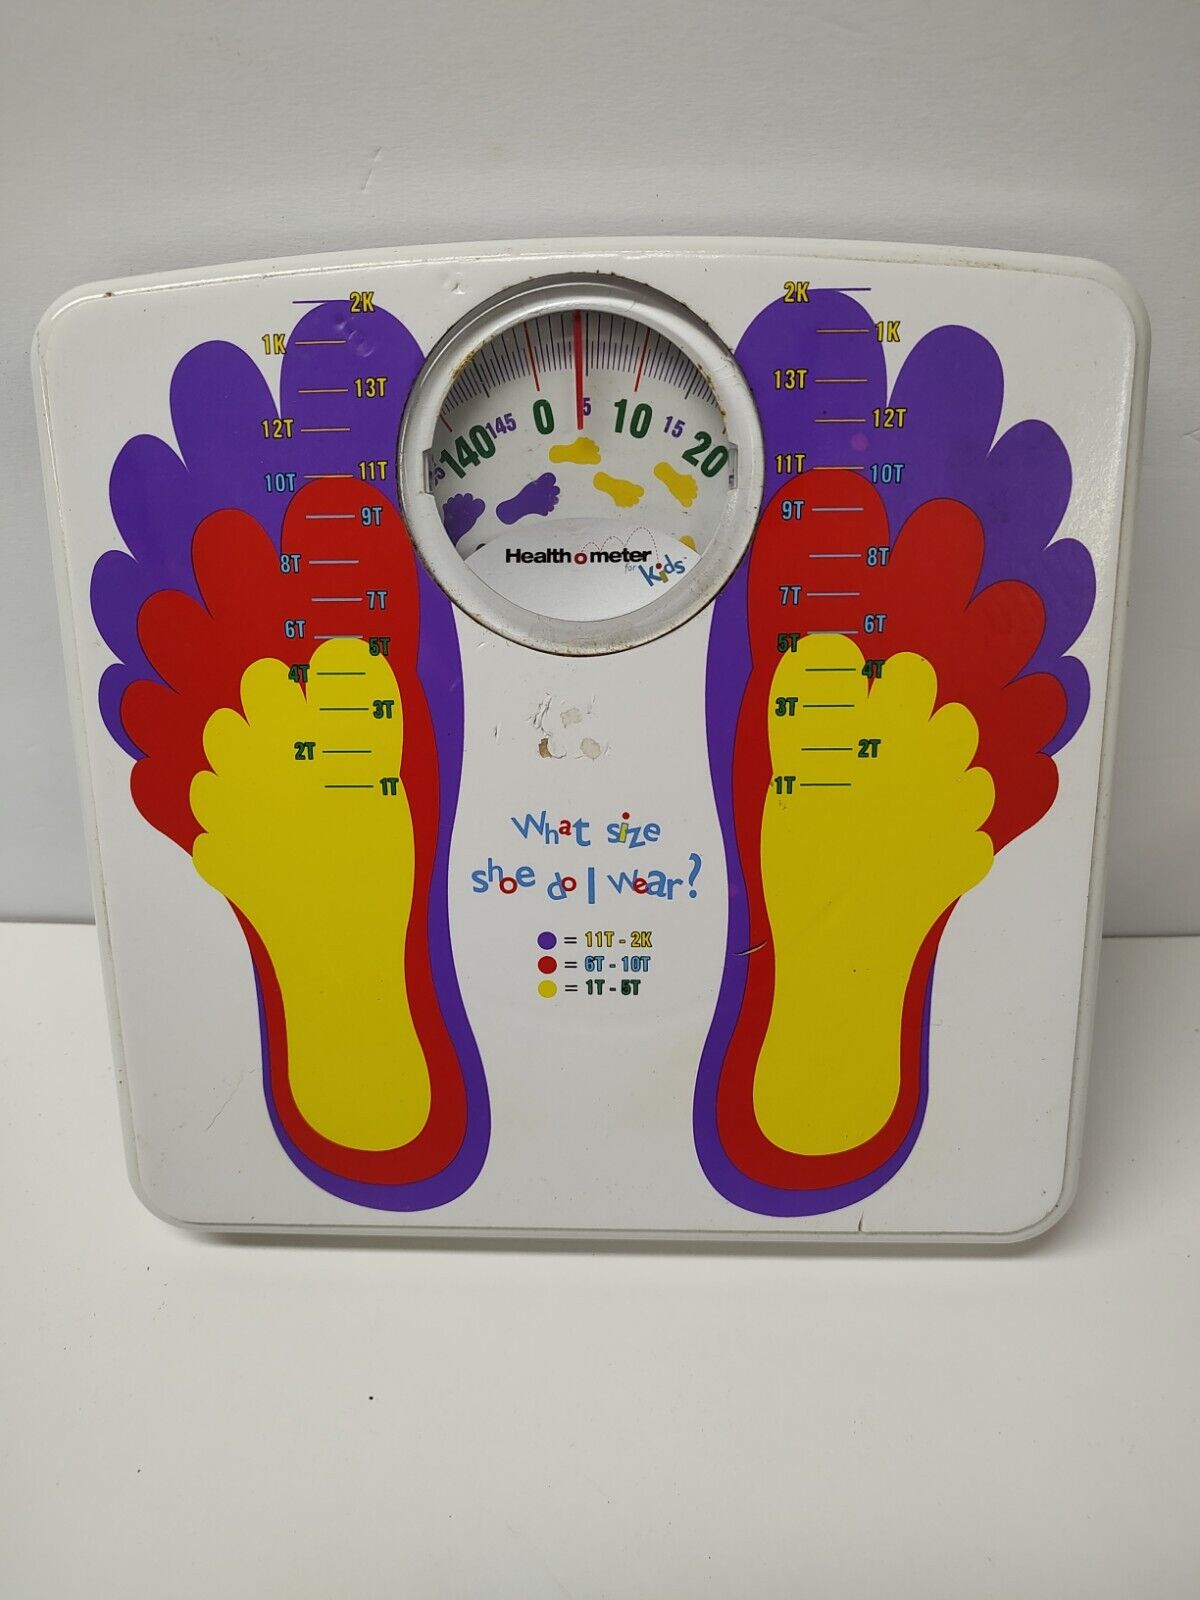 Vintage health-o-meter children's scale foot measure up to 149 lbs